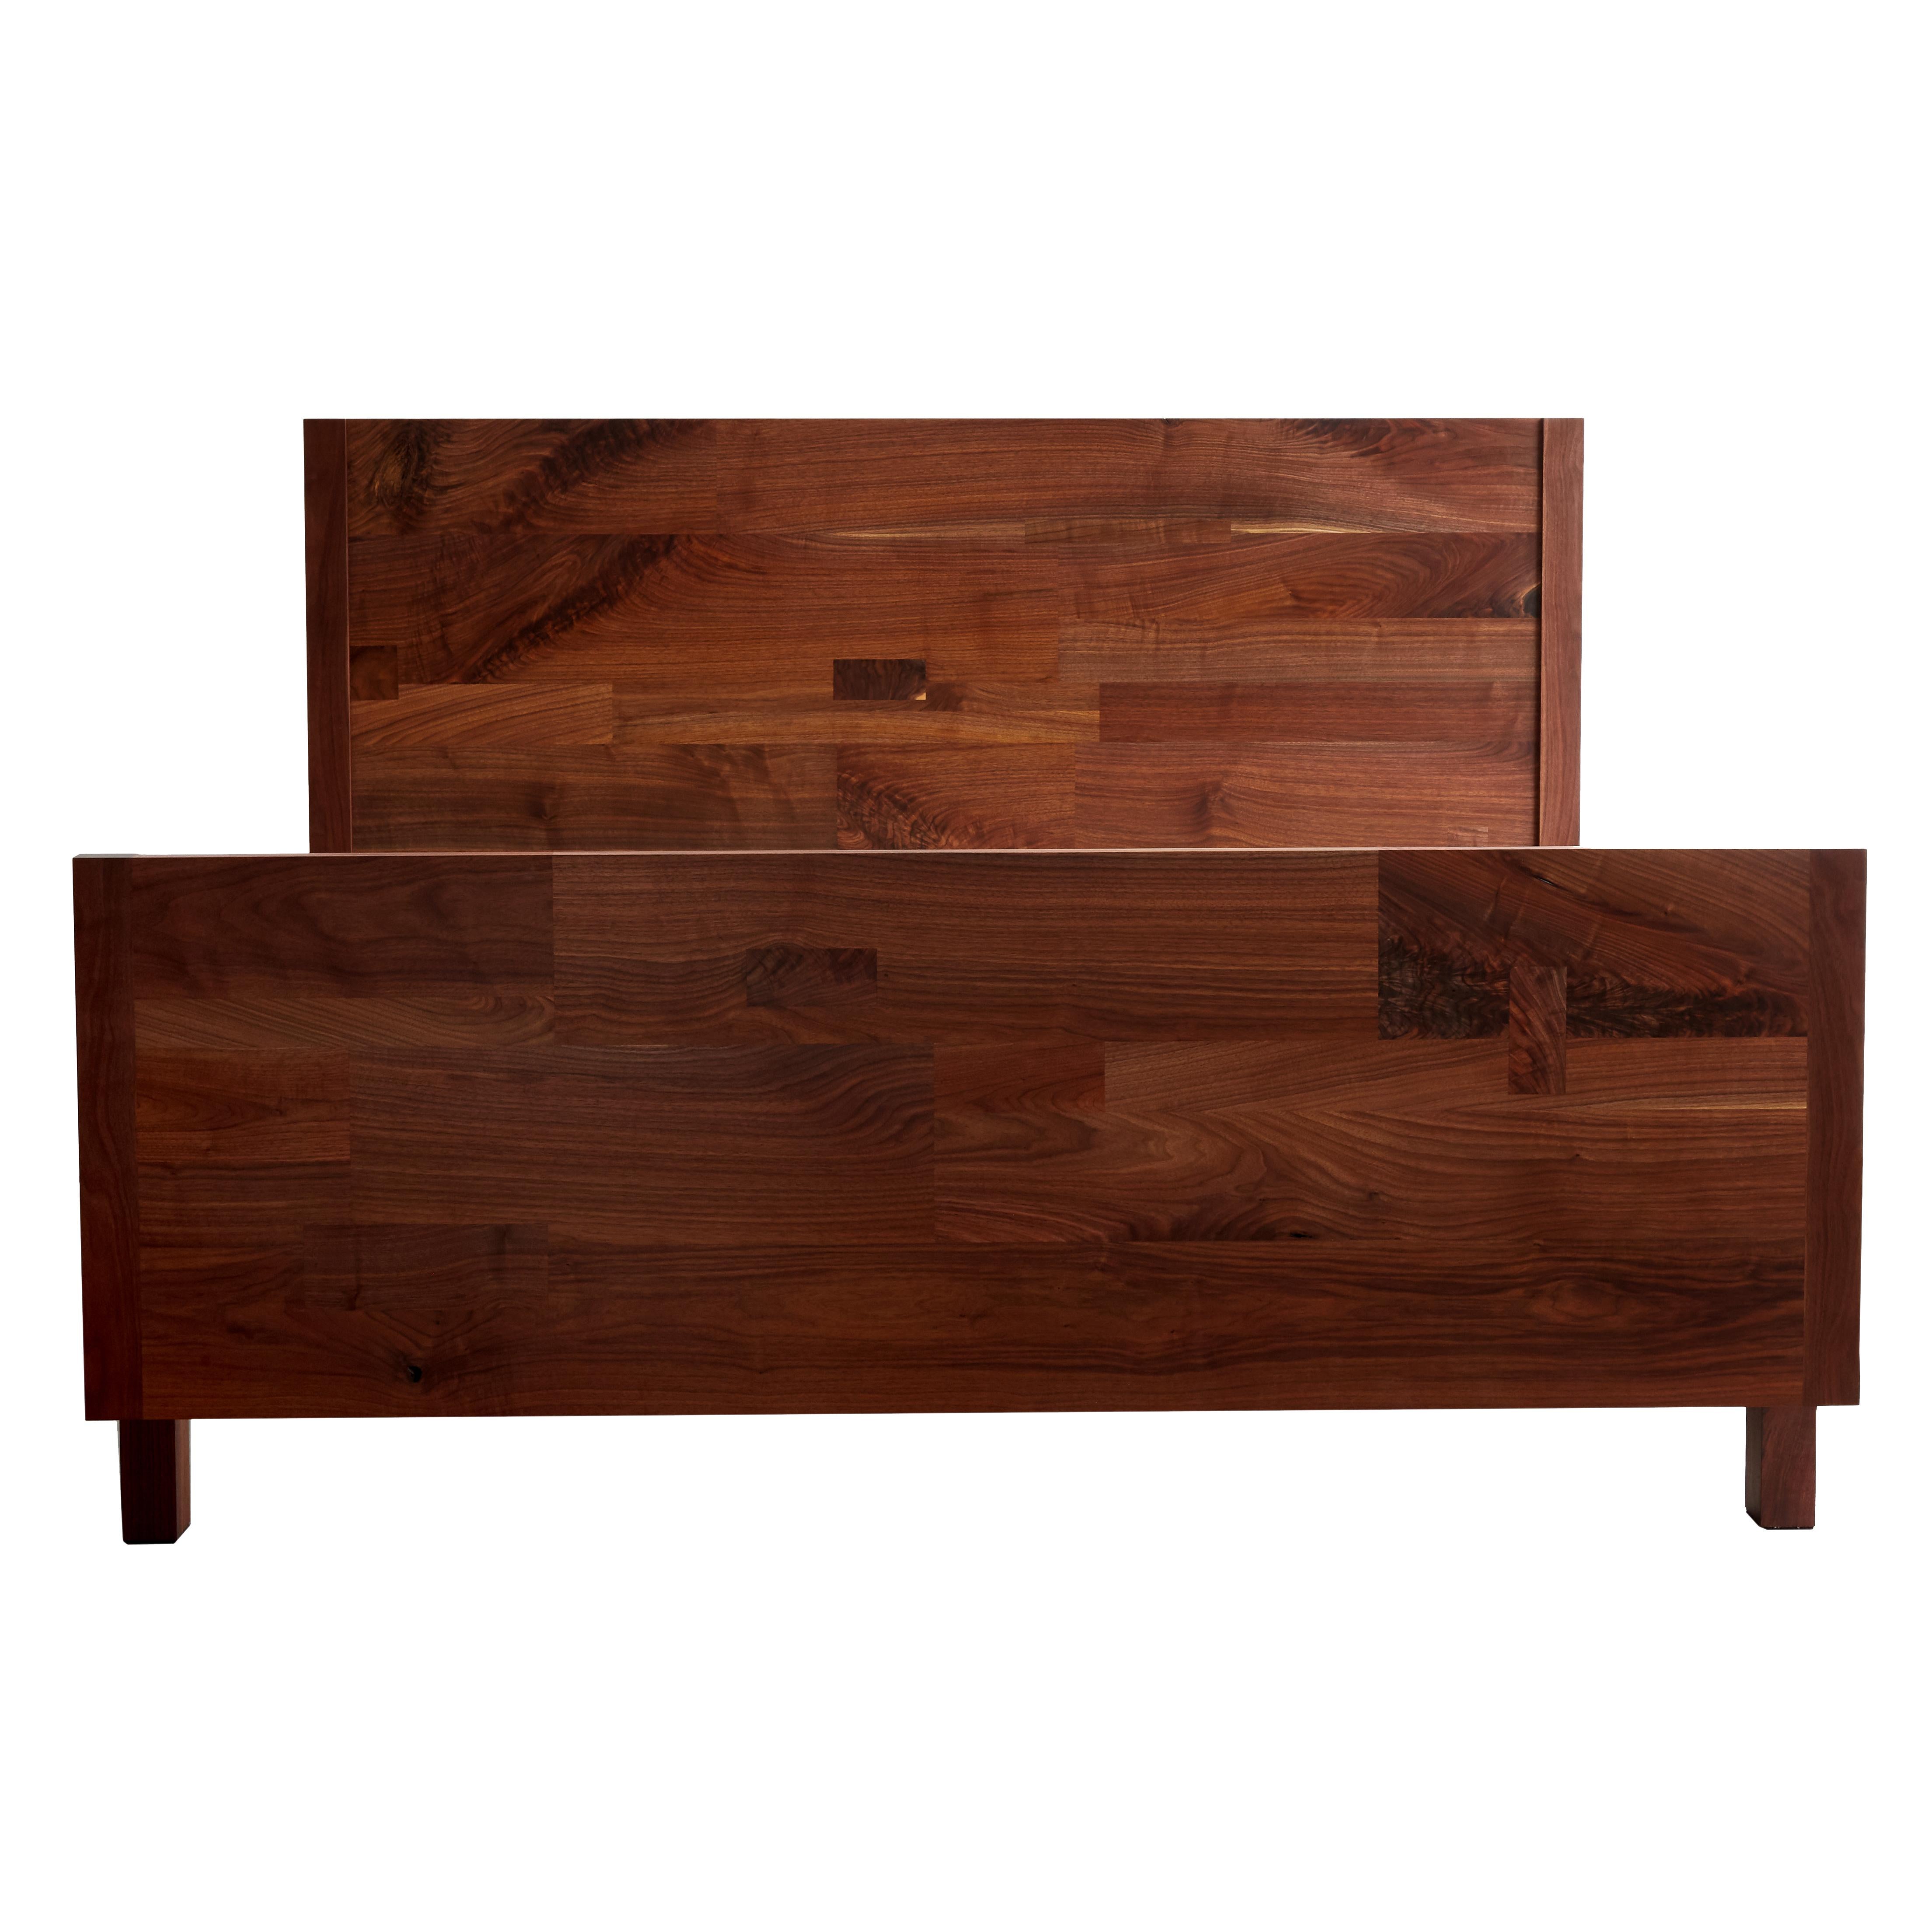 Timeless in it's design, New York Heartwoods' King-sized Walnut Perri Bed is handcrafted employing traditional joinery techniques and breaks down for easy transport and assembly. Built to last, each bed is comprised of a solid black walnut frame